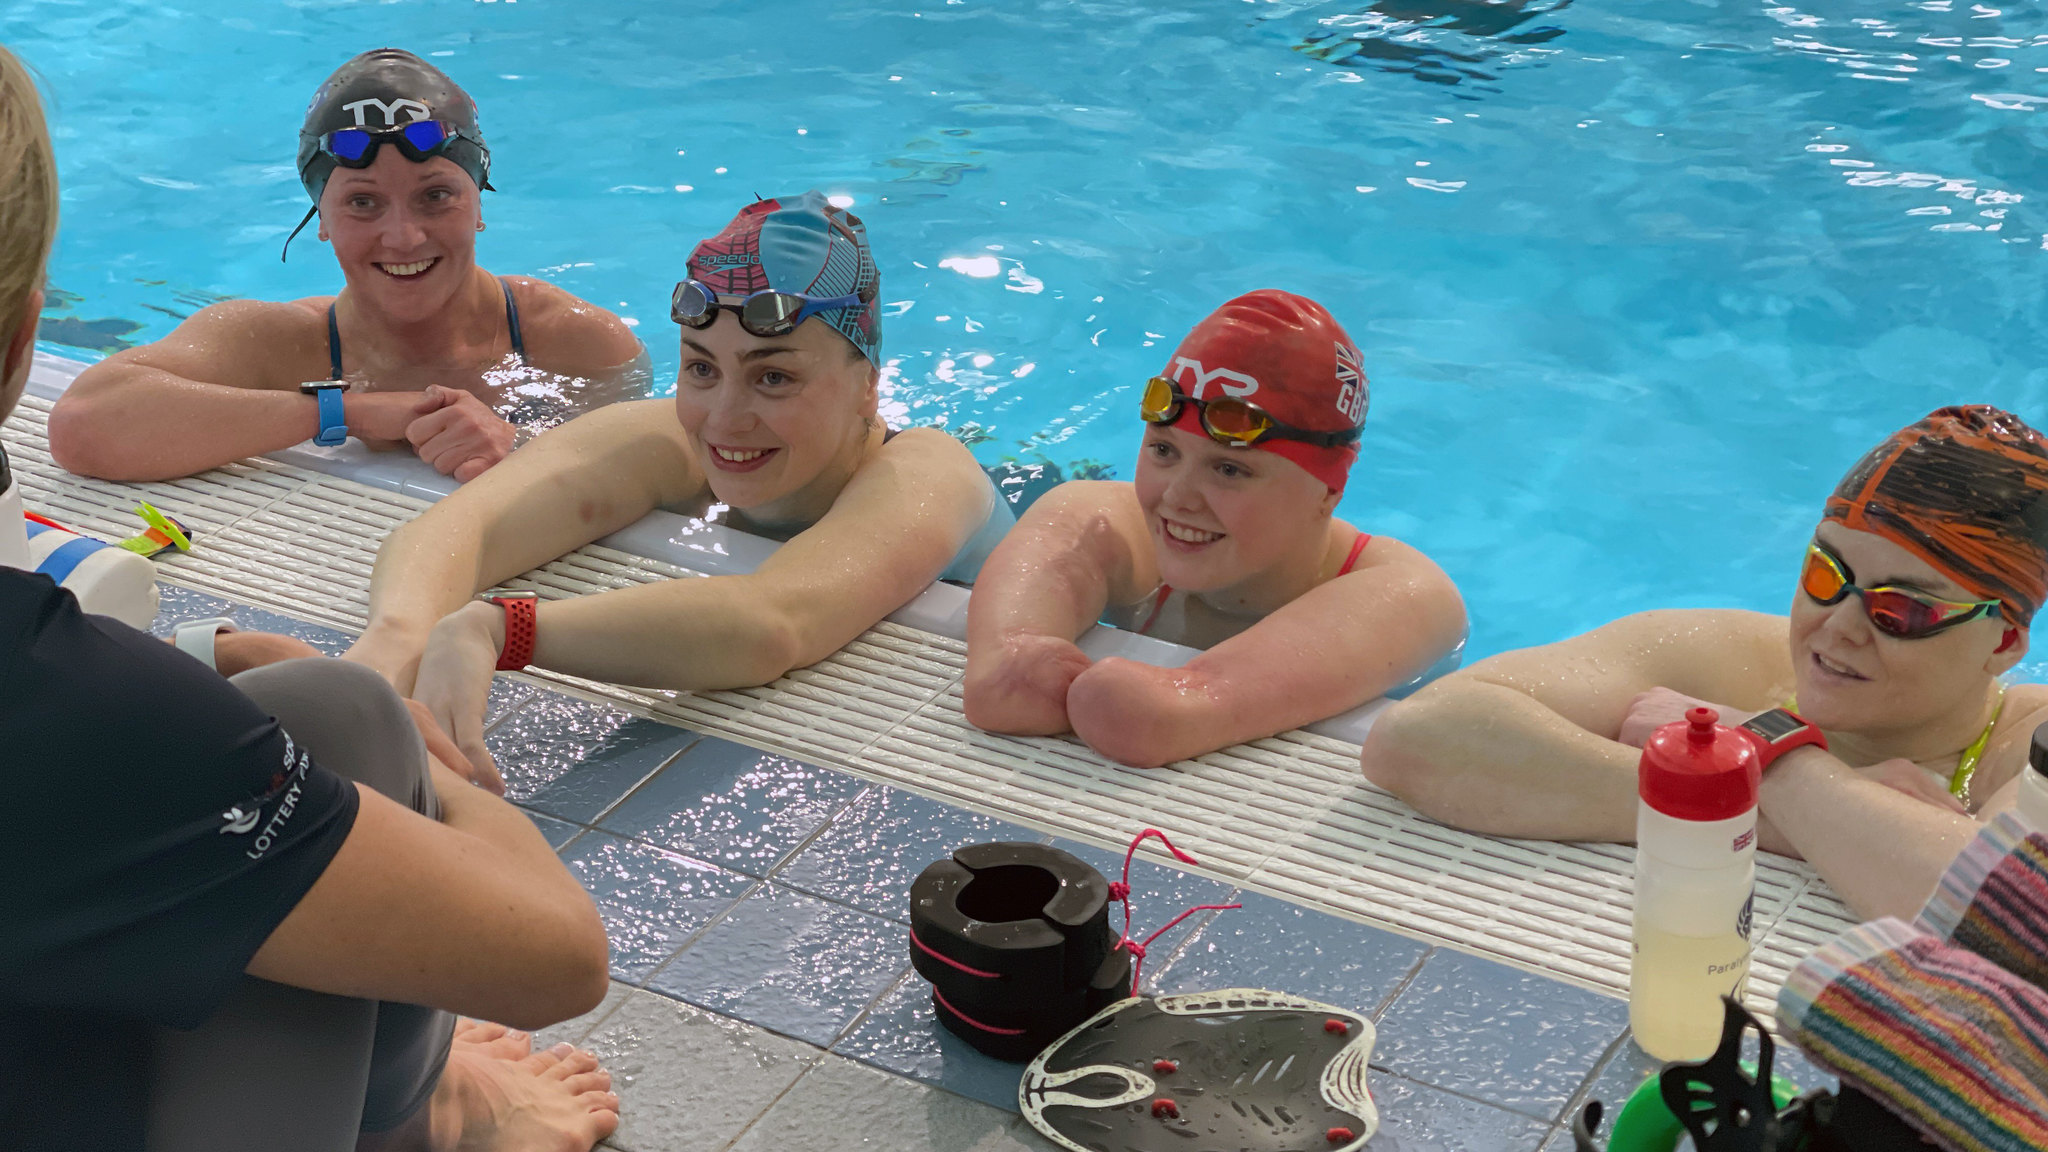 (From left) Suzanna Hext, Tully Kearney and Ellie Challis in the London 2012 Legacy Pool at the Team Bath Sports Training Village talking to coach Lauren Jocelyn. CREDIT: British Swimming.